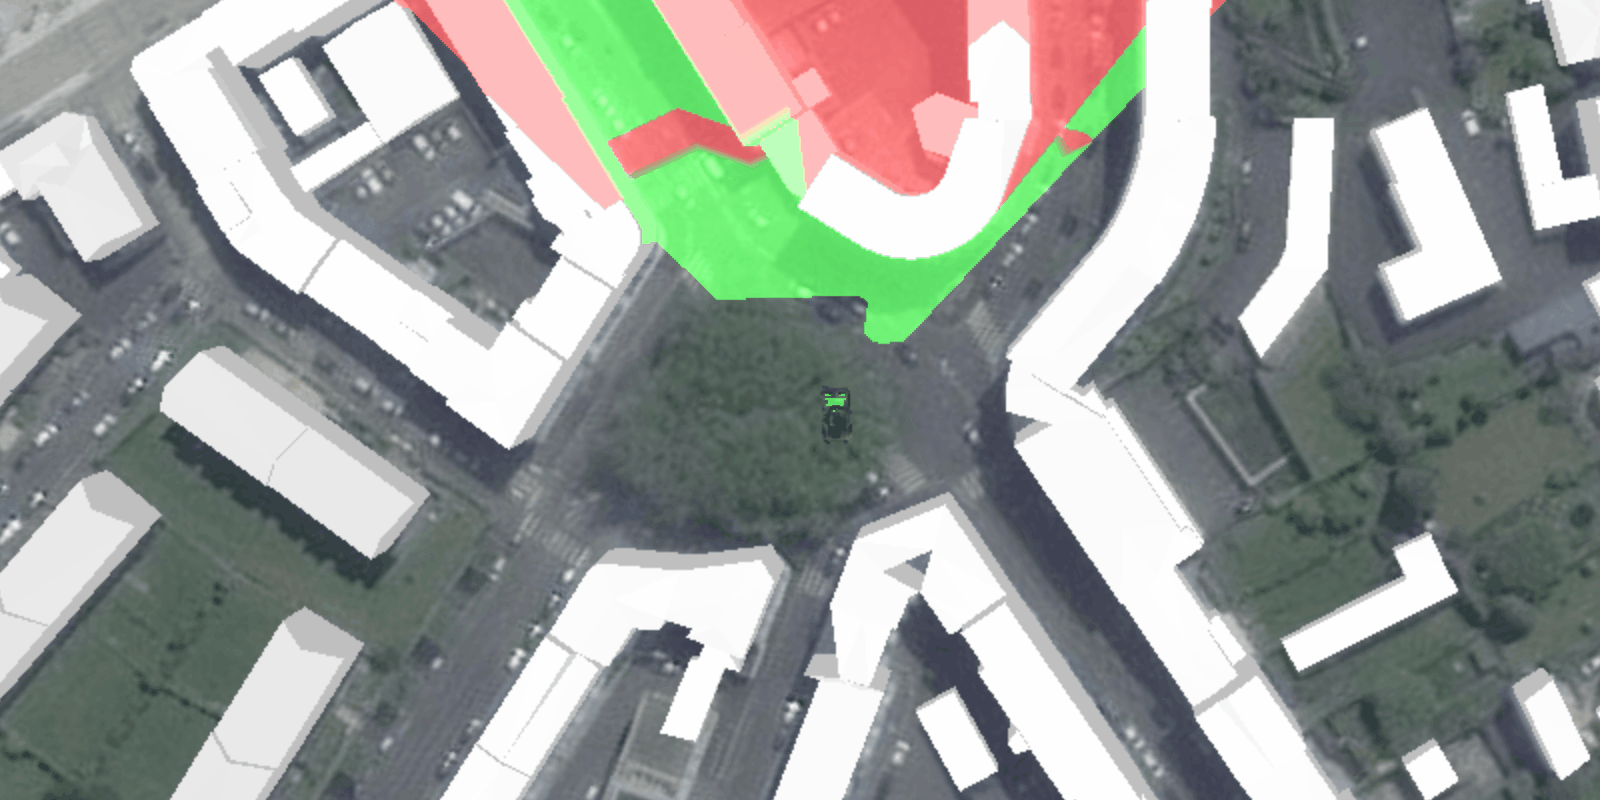 Image of viewshed for geoelement